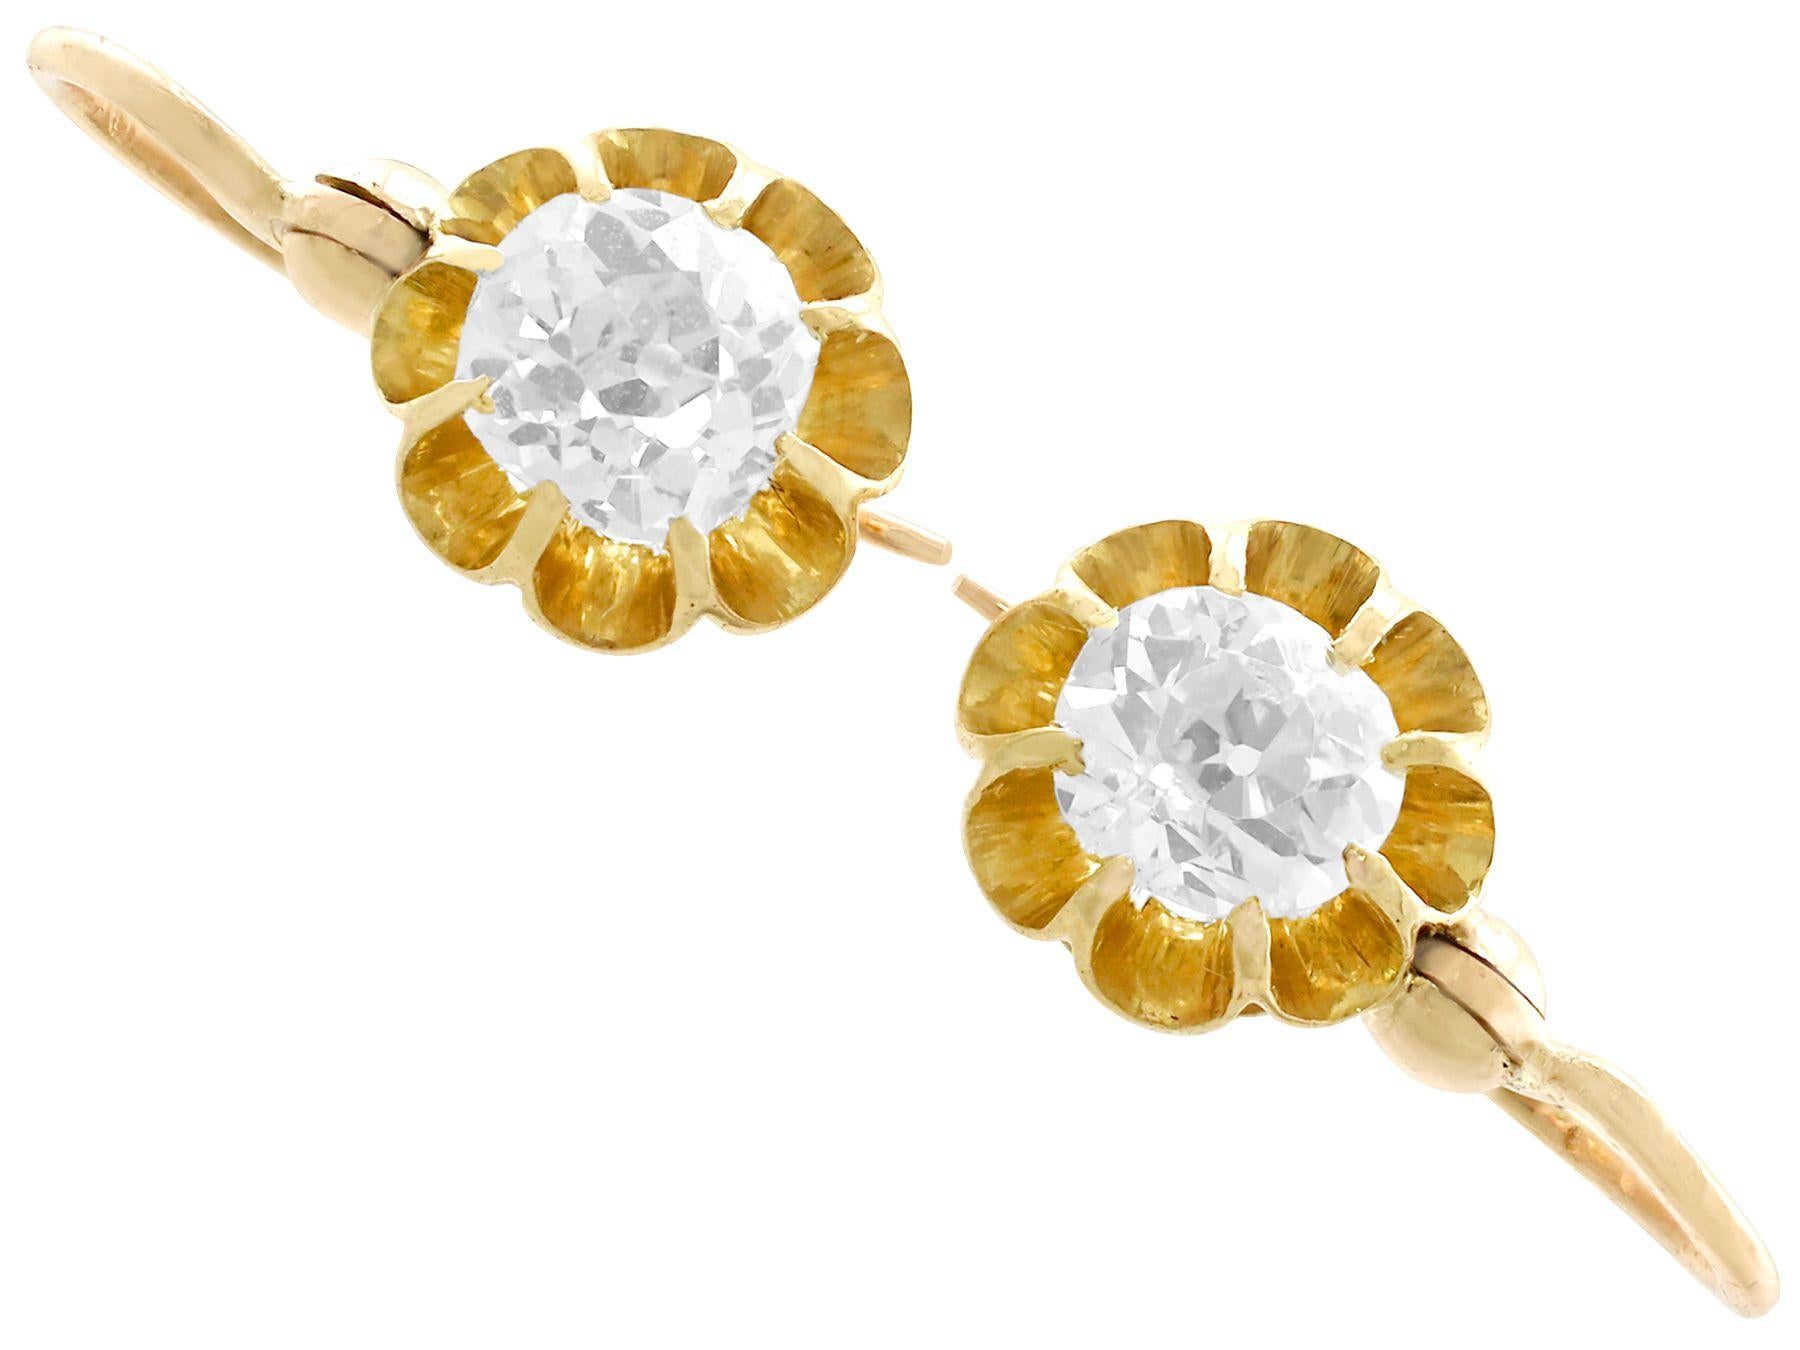 A fine and impressive antique pair of 0.98 carat diamond and 15 karat yellow gold drop earrings; part of our diverse antique jewelry and estate jewelry collections.

These fine and impressive antique drop earrings have been crafted in 15k yellow